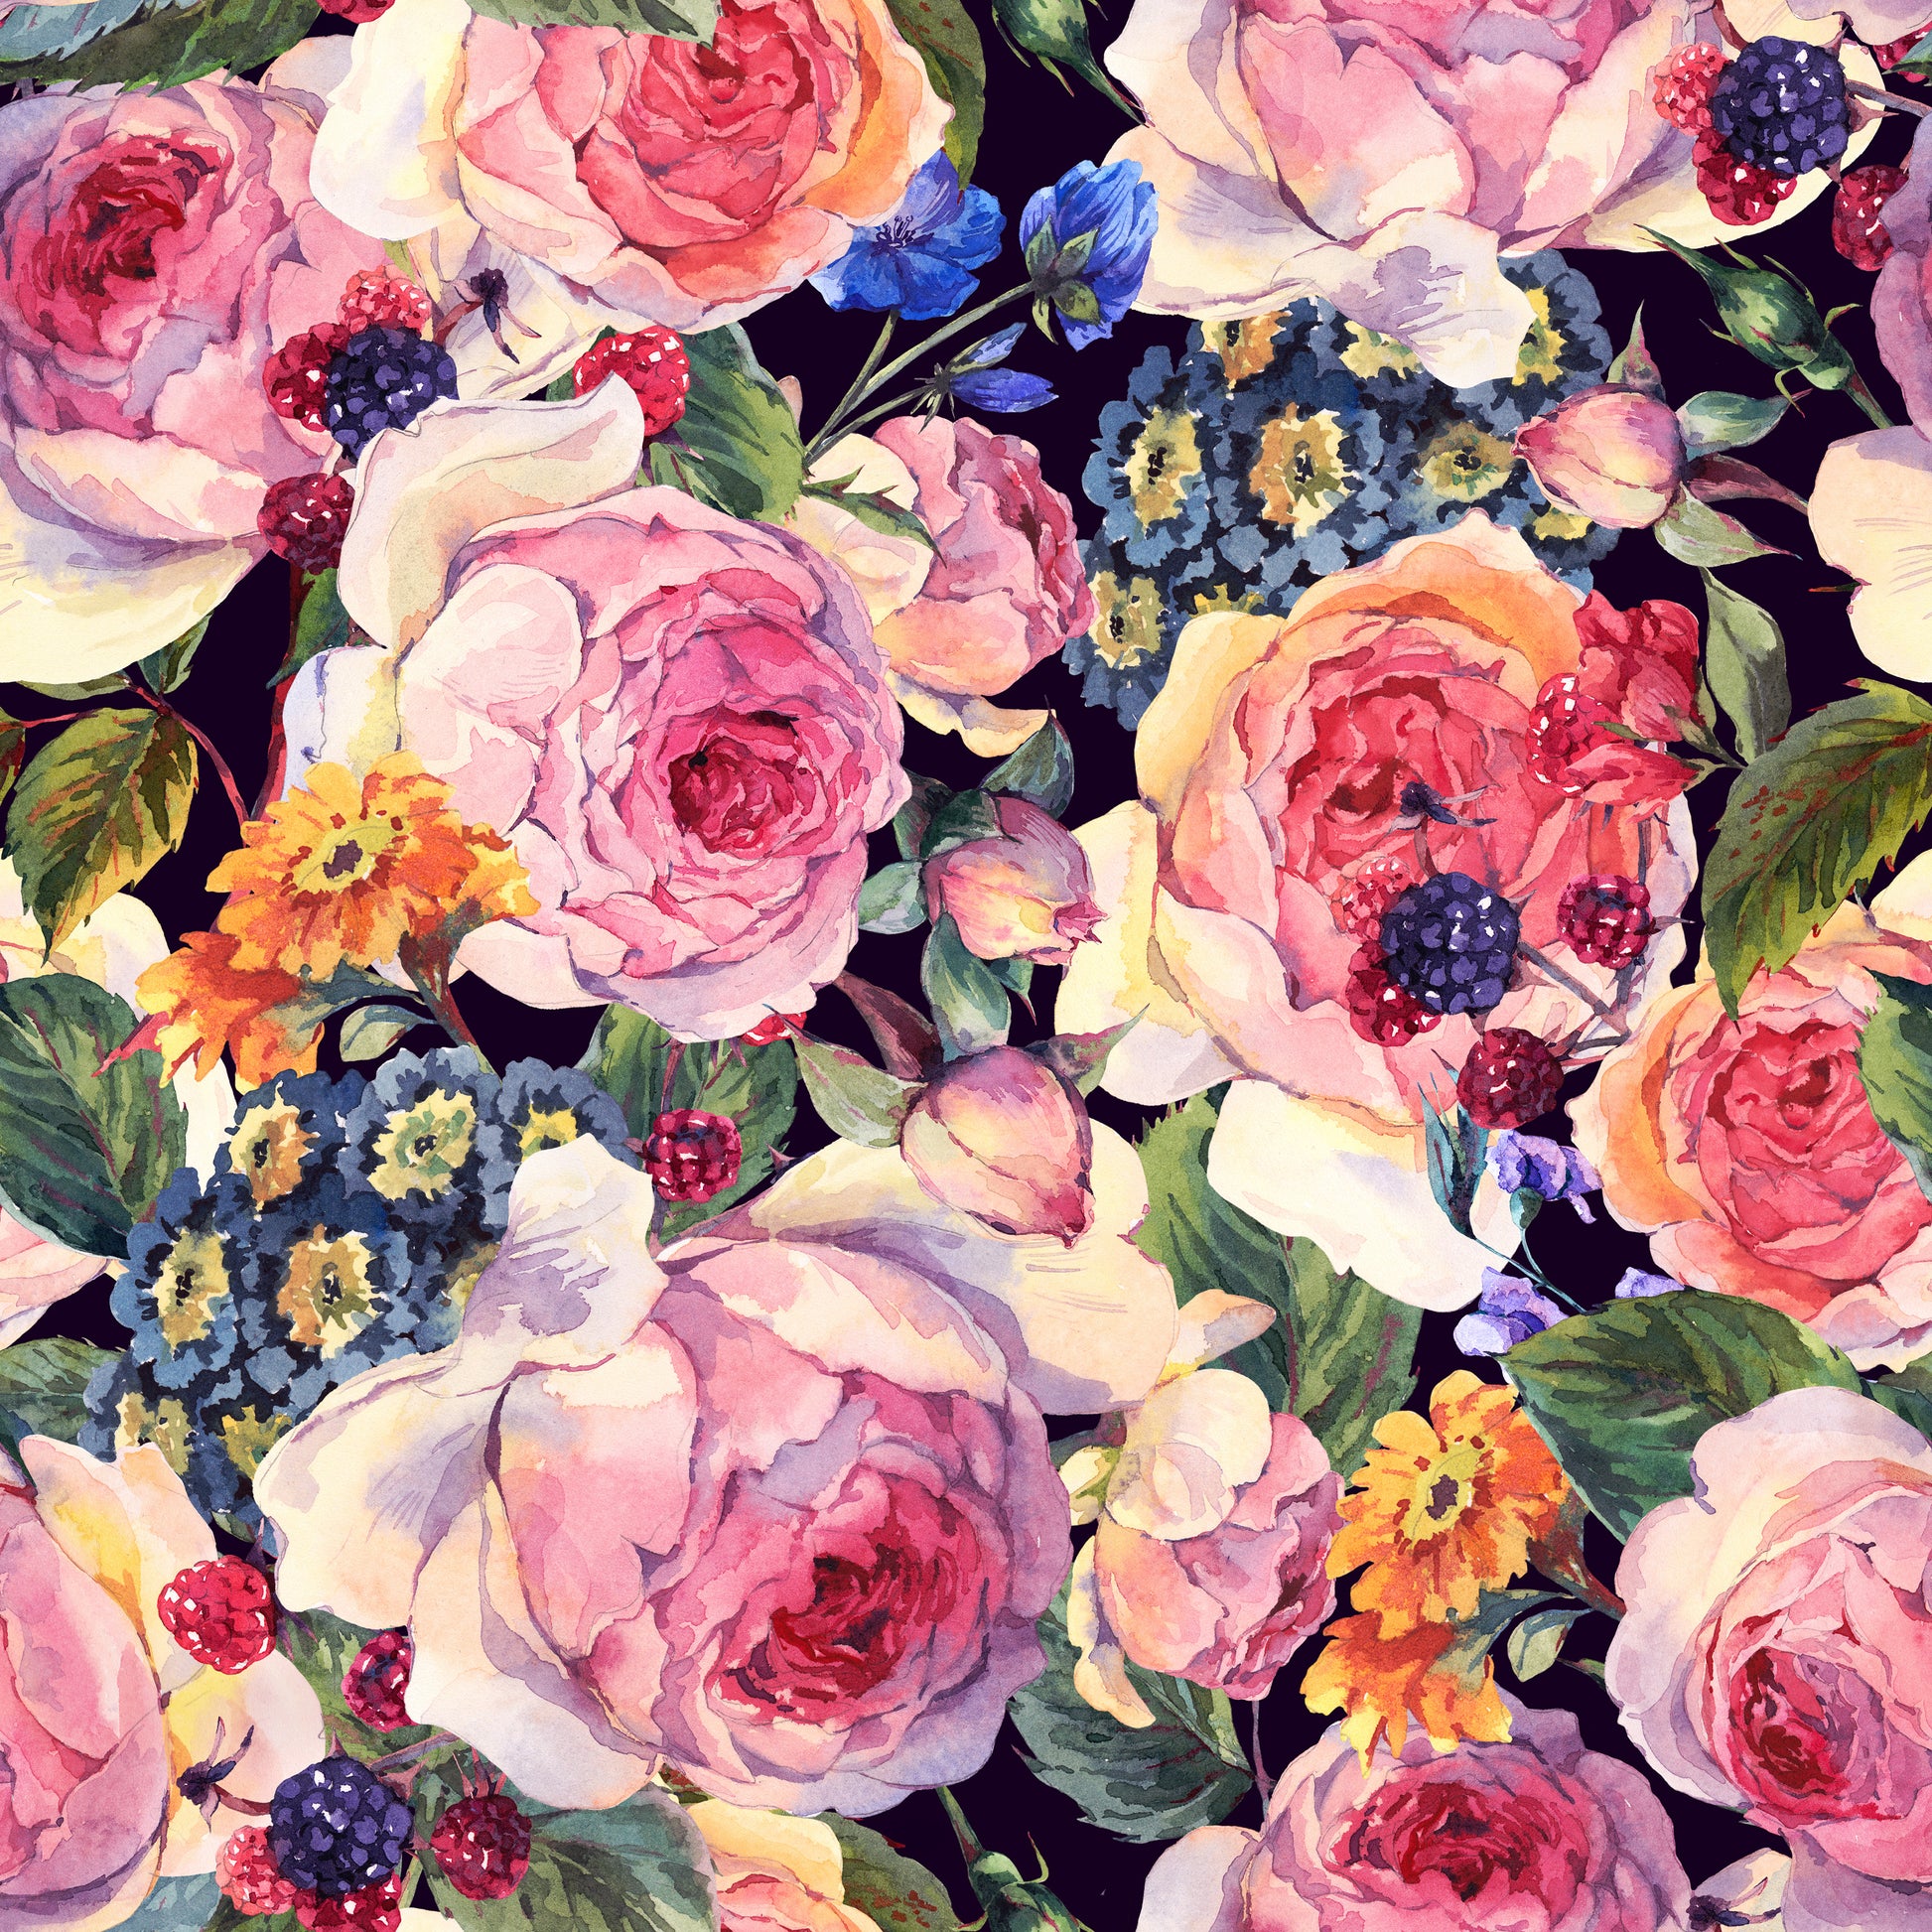 rose wallpaper pattern up close with dark bavkground vivid pink roses wild berries and yellow and blue flowers